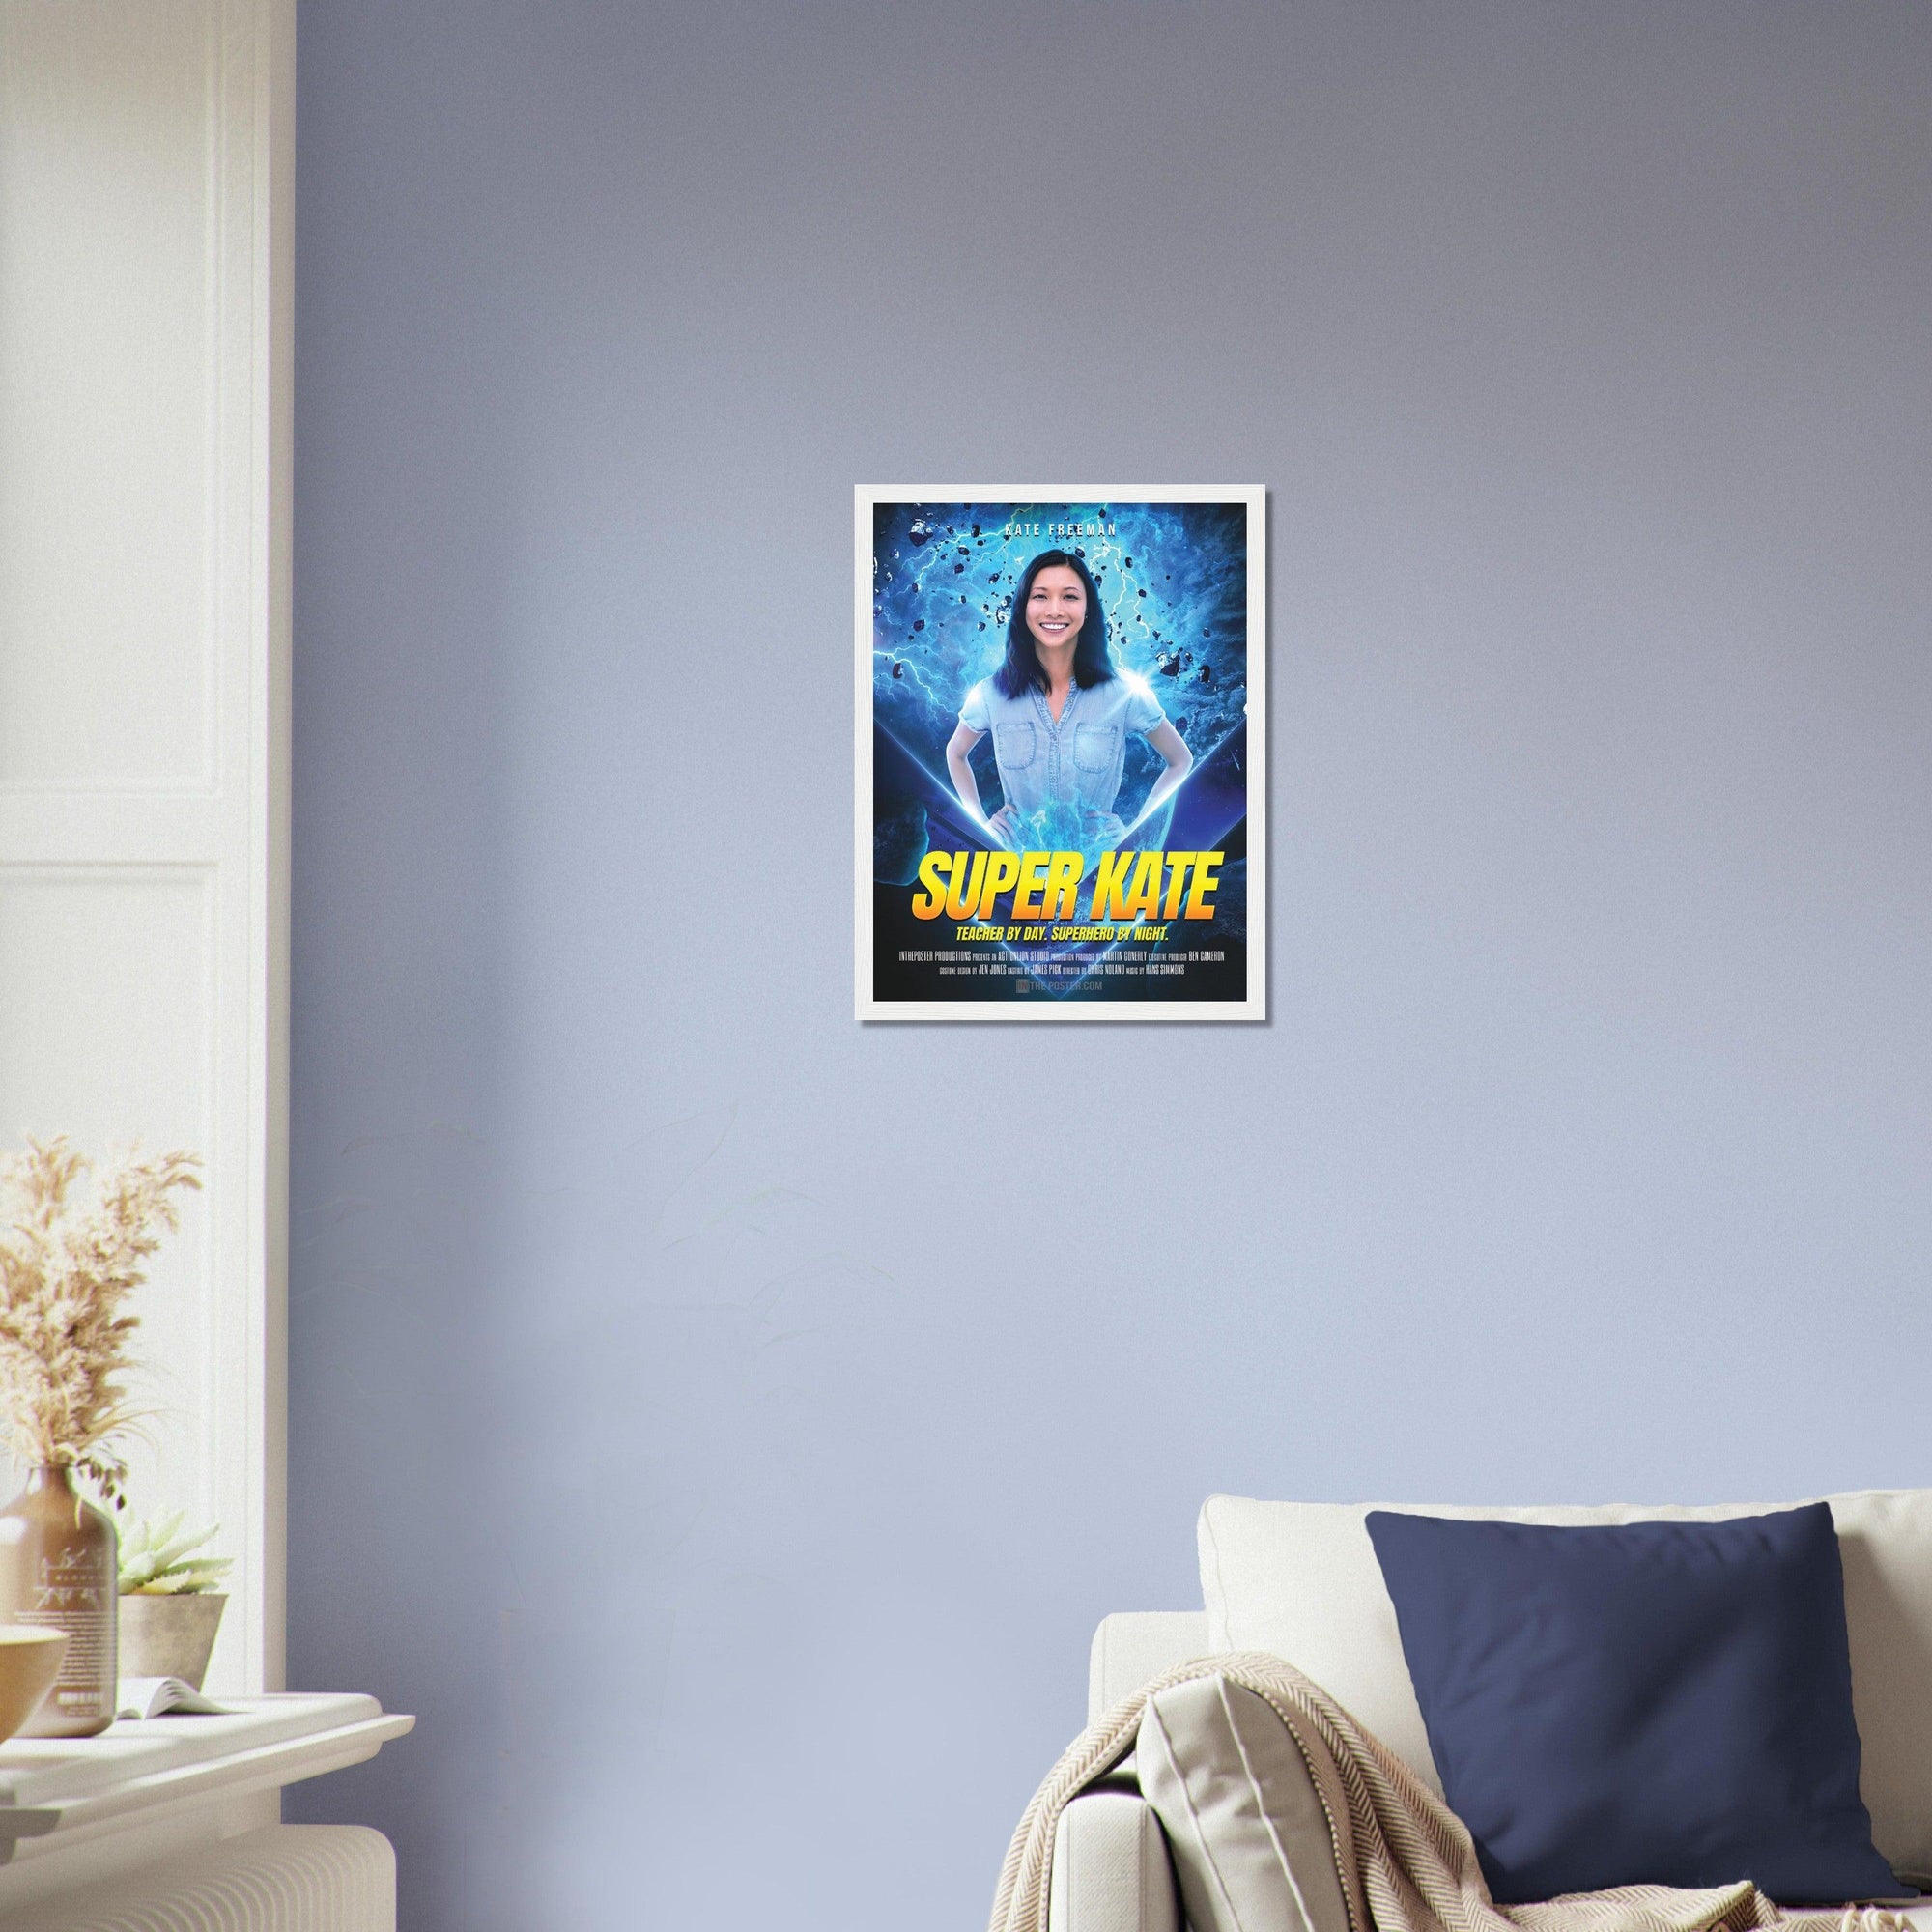 The Super Hero Custom Movie Poster design in a white frame in size small, on the wall above a beige sofa and blue cushion